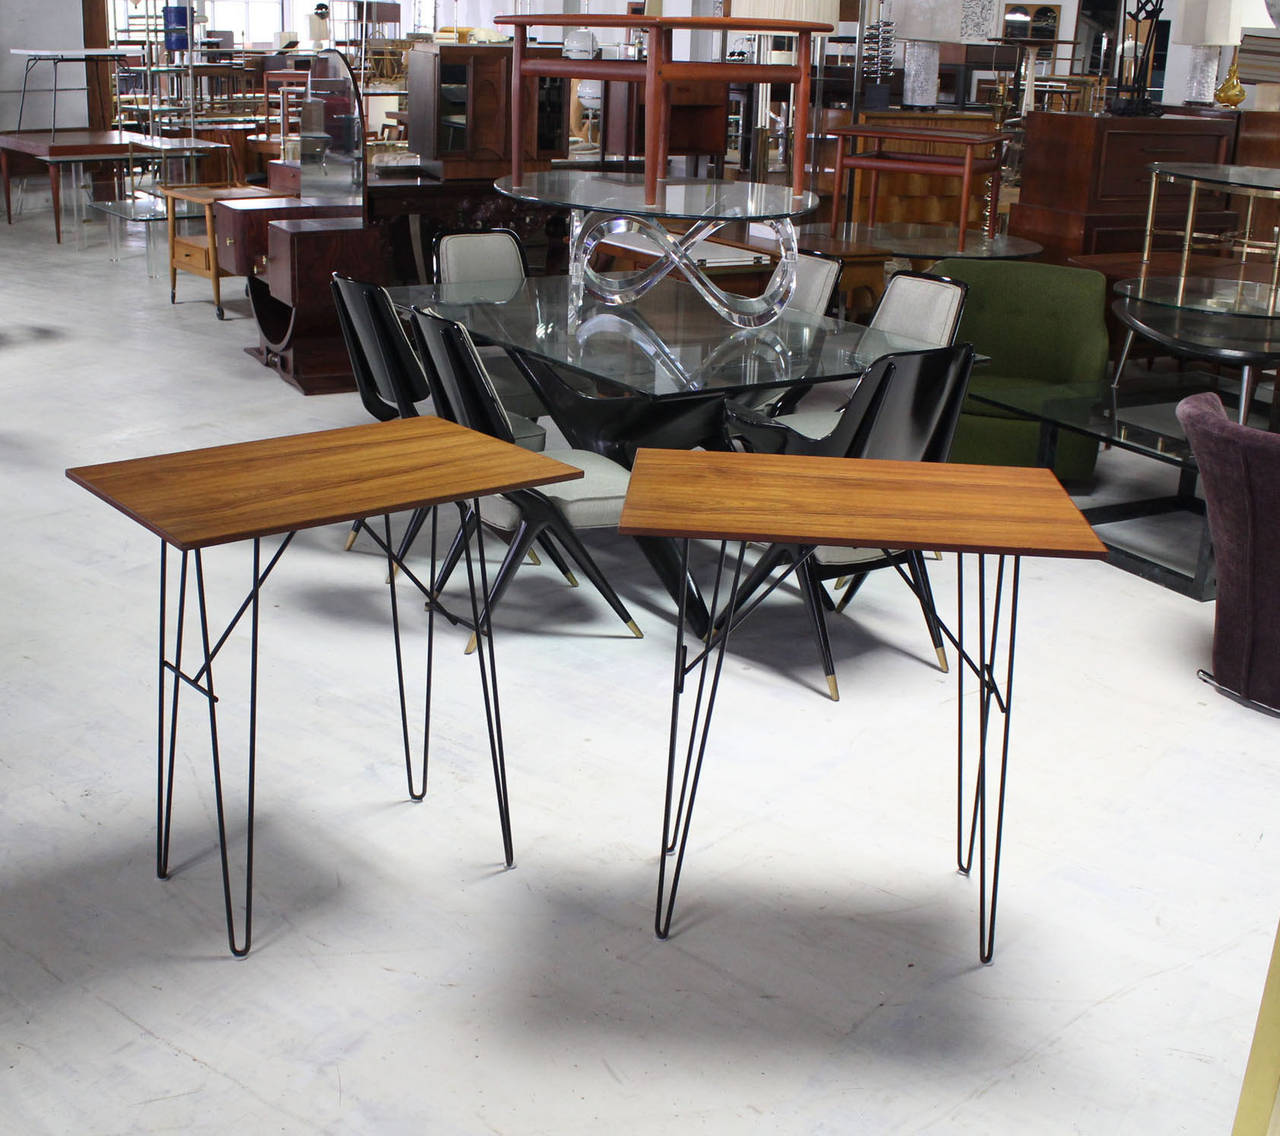 Pair of very fine design high quality tall tables with walnut tops.